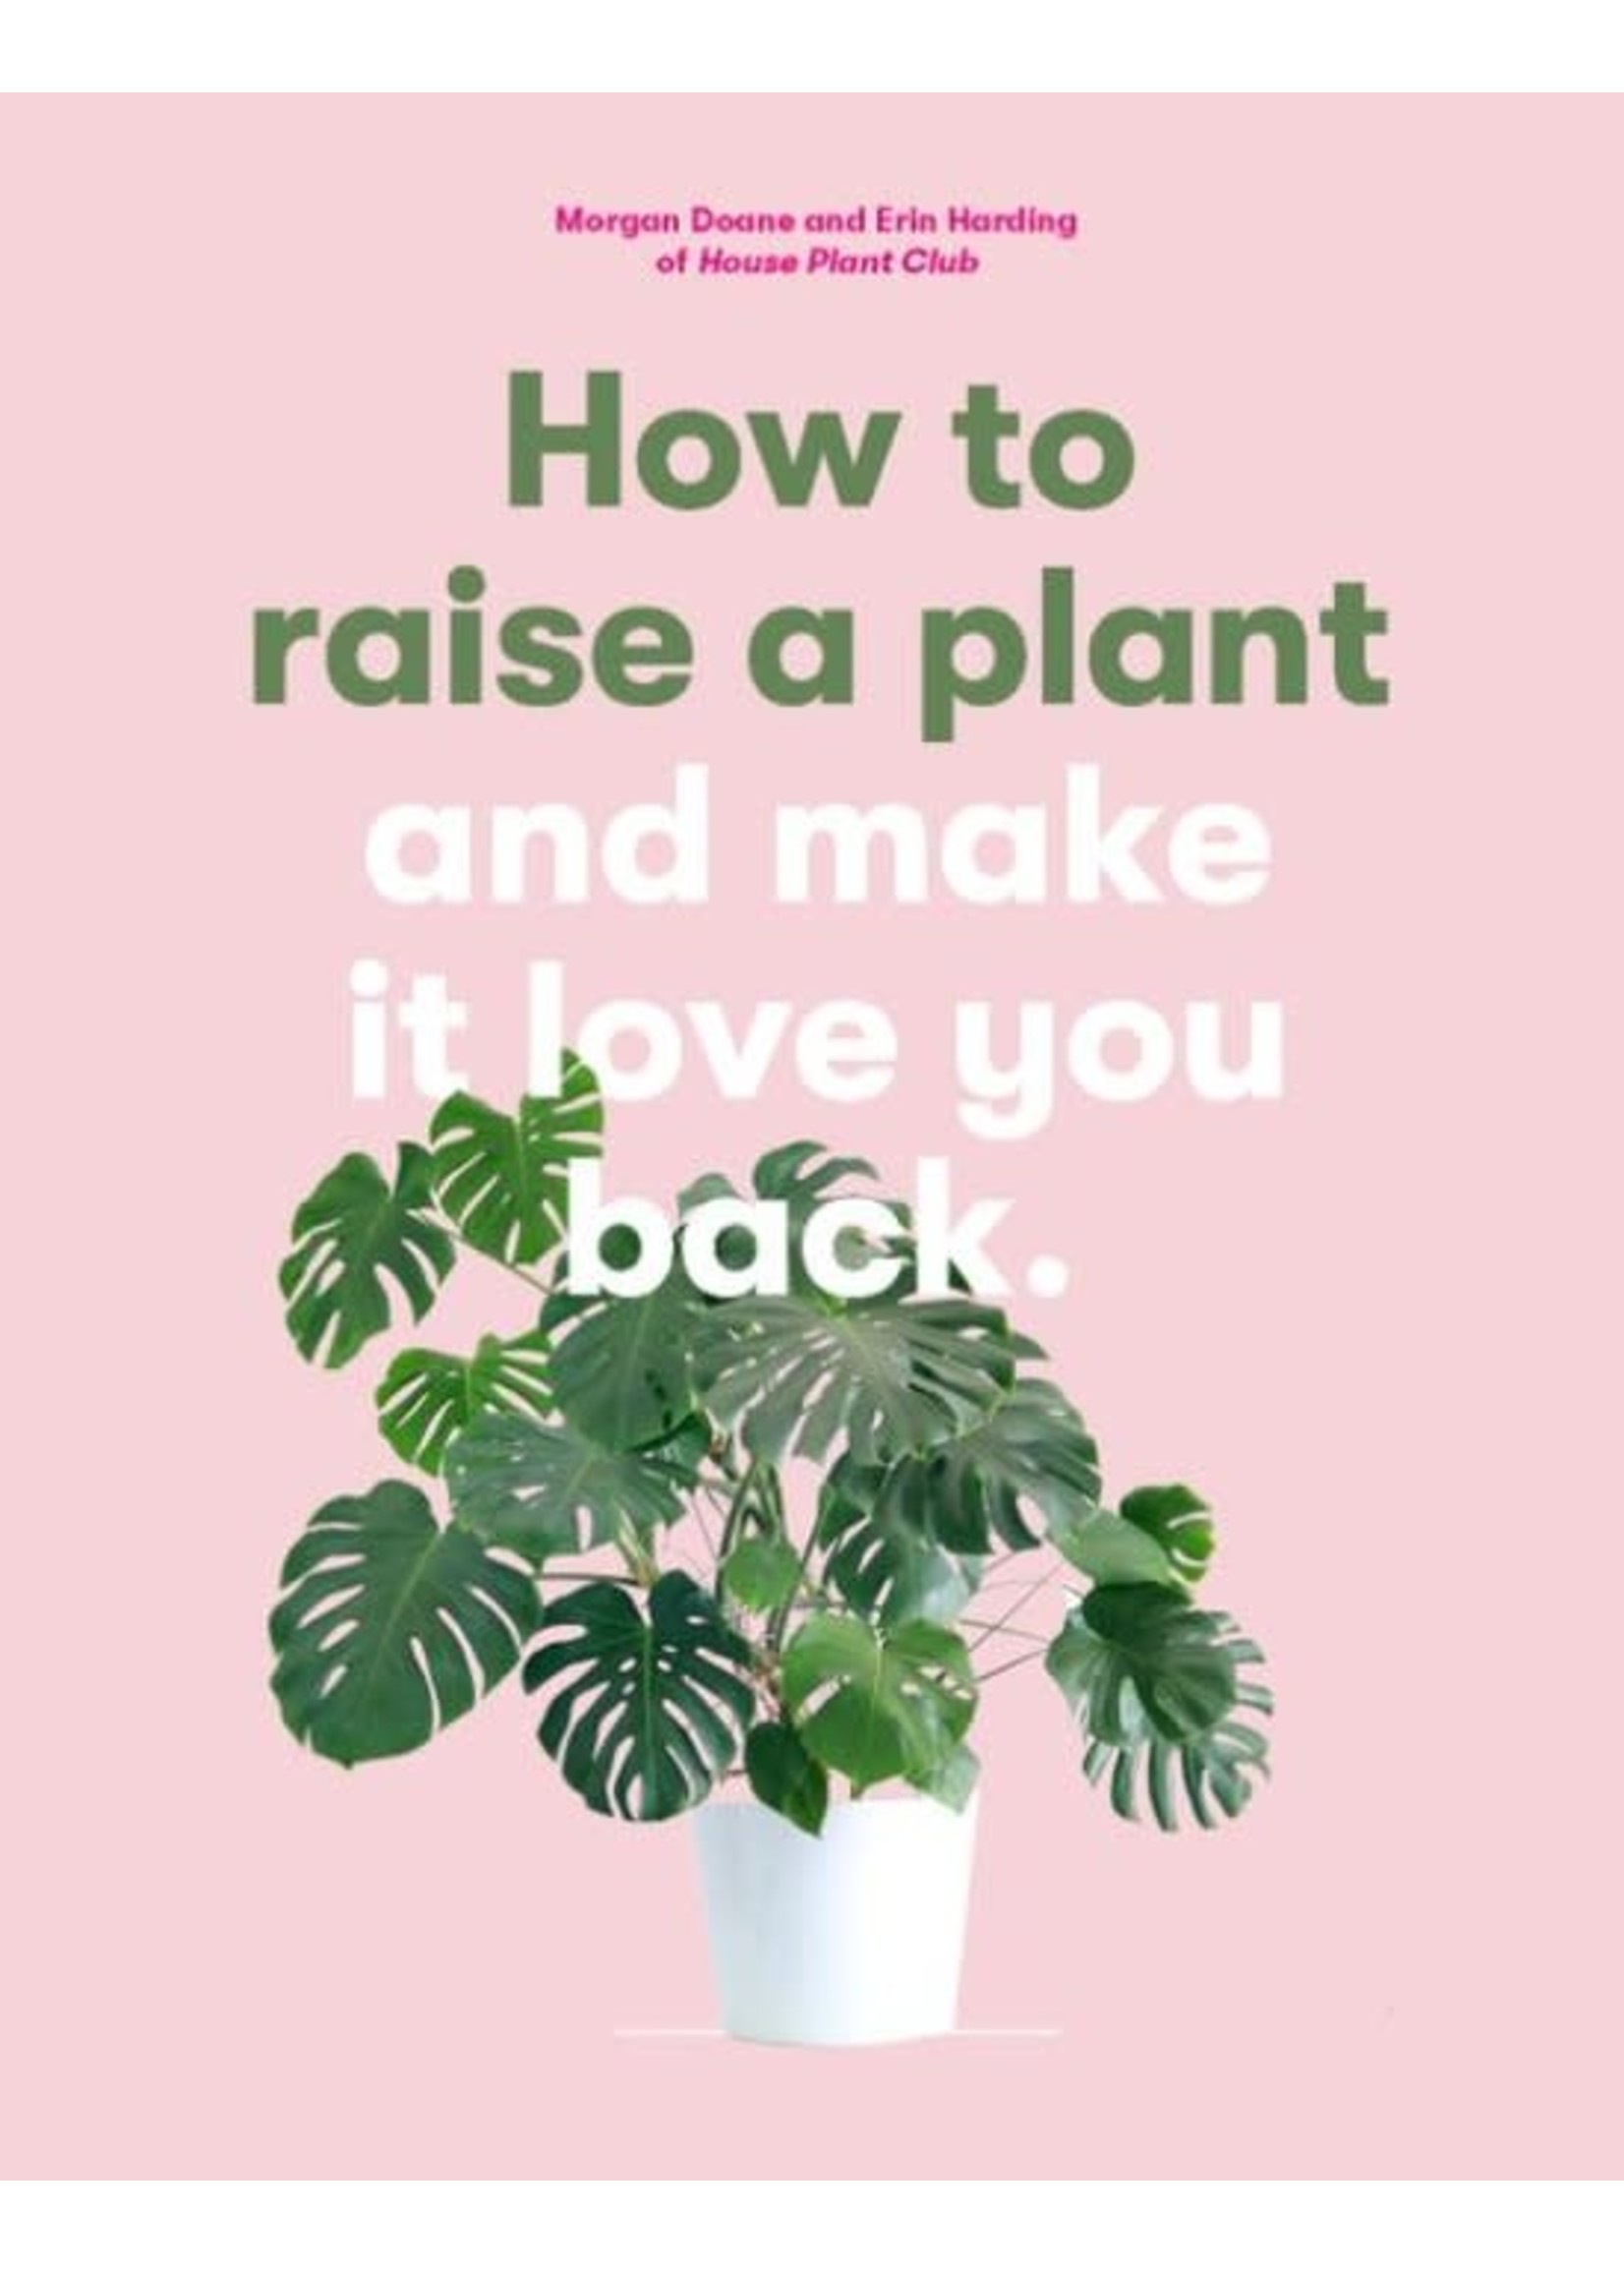 How to raise a plant [eng]